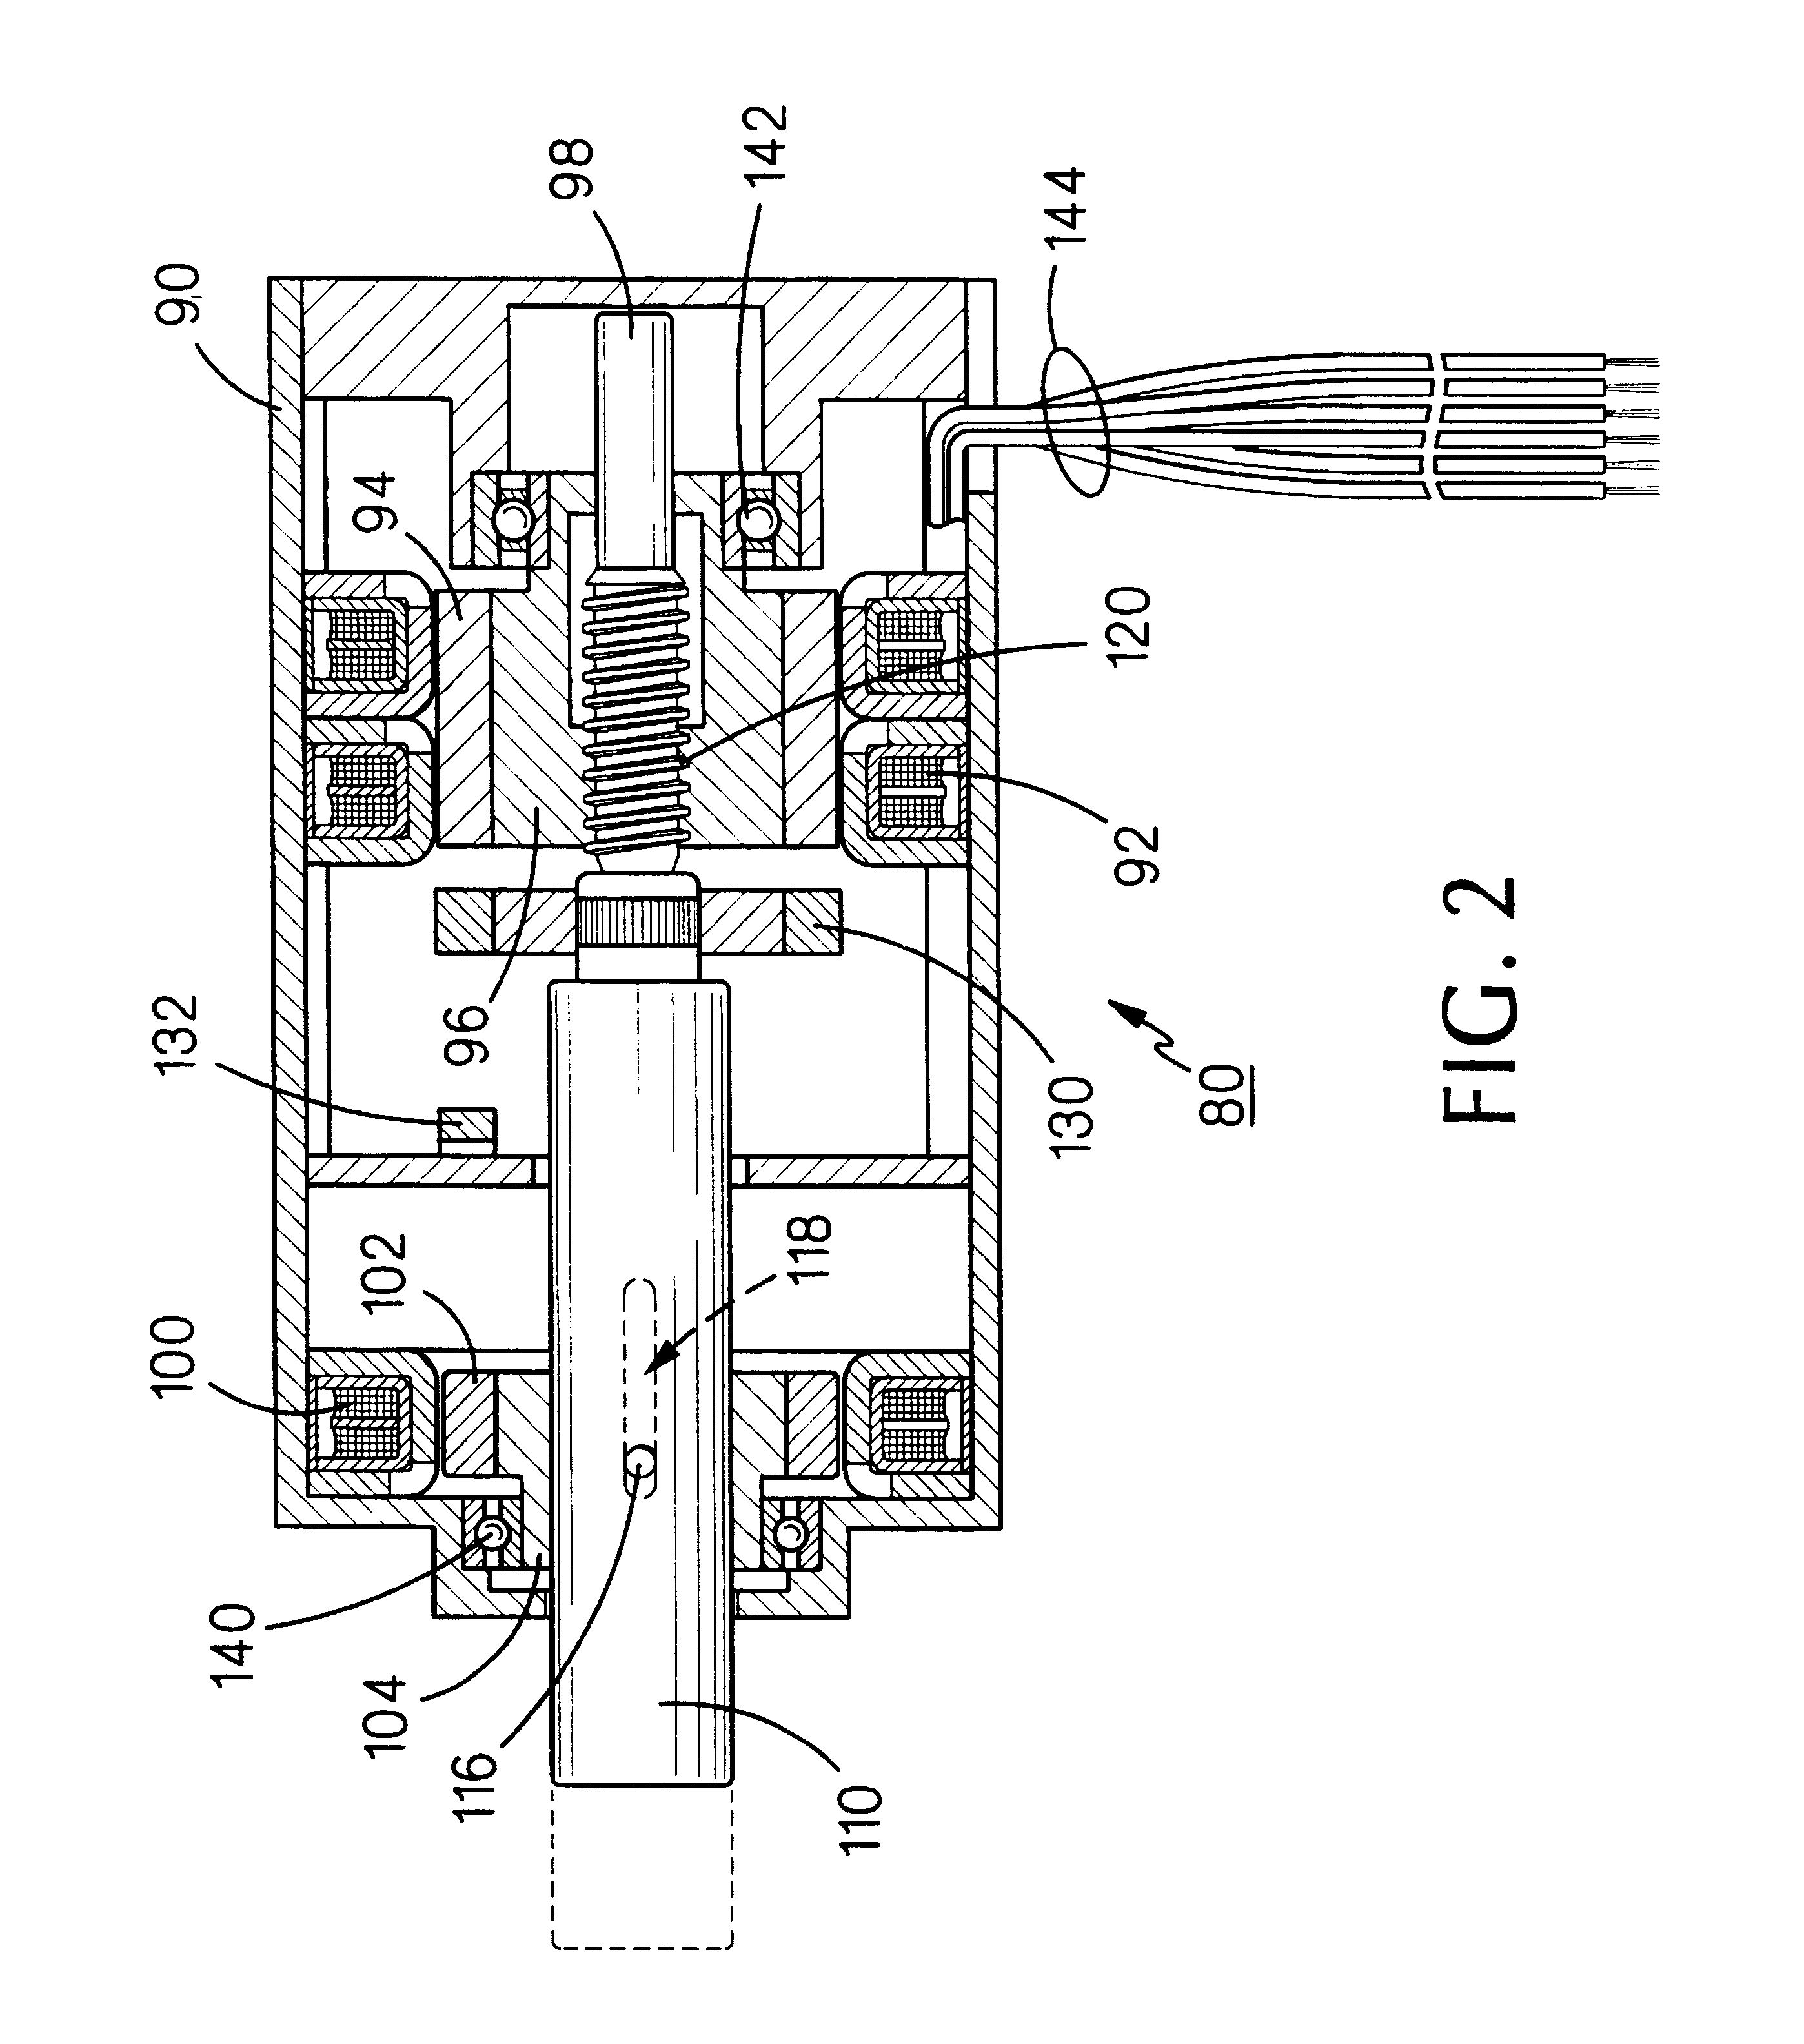 Linear/rotary electromagnetic device